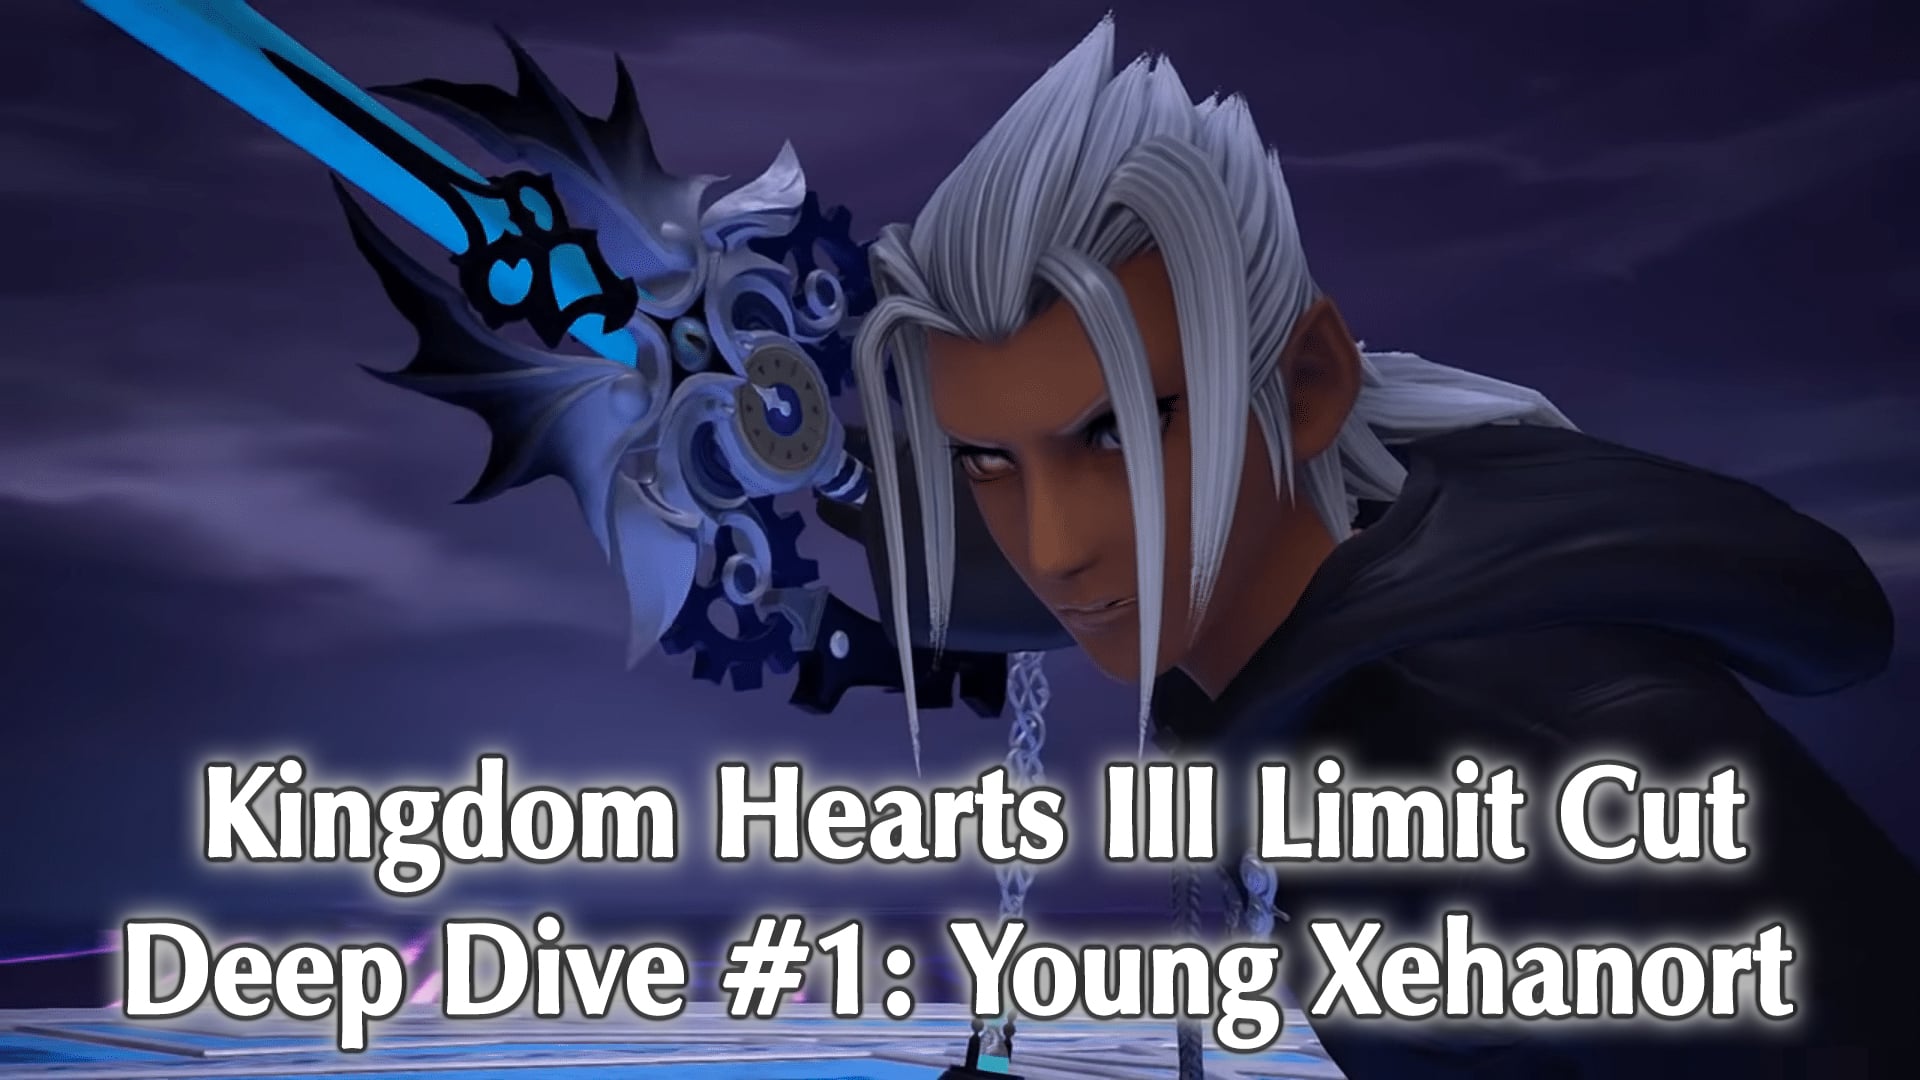 What Makes The Young Xehanort Data Battle So Awesome; Kingdom Hearts III Limit Cut Deep Dive #1